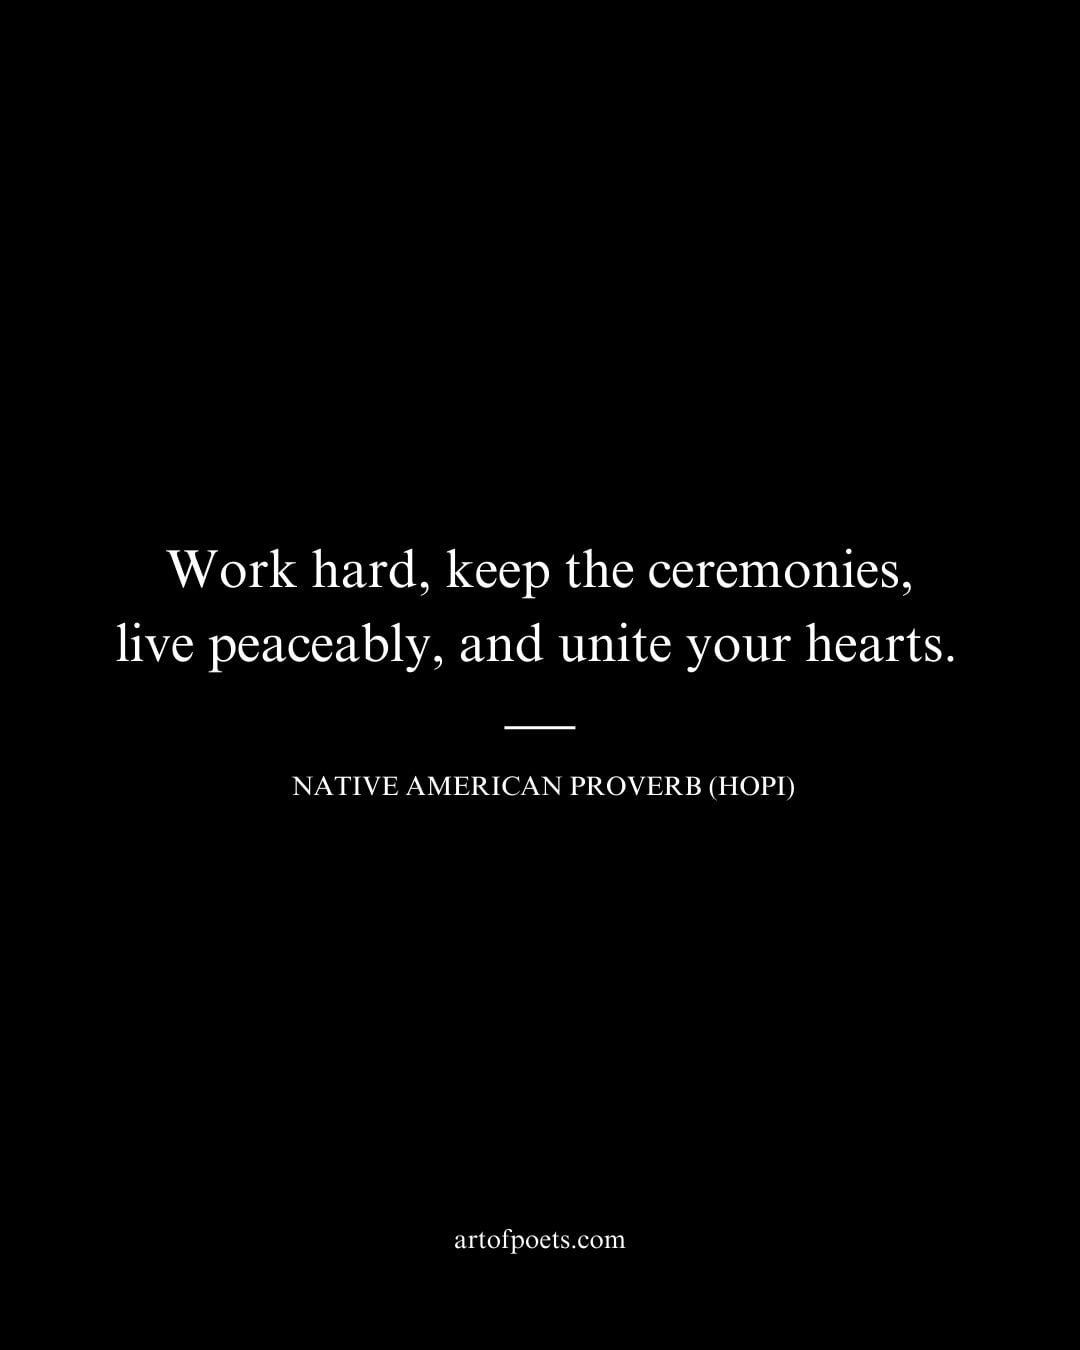 Work hard keep the ceremonies live peaceably and unite your hearts